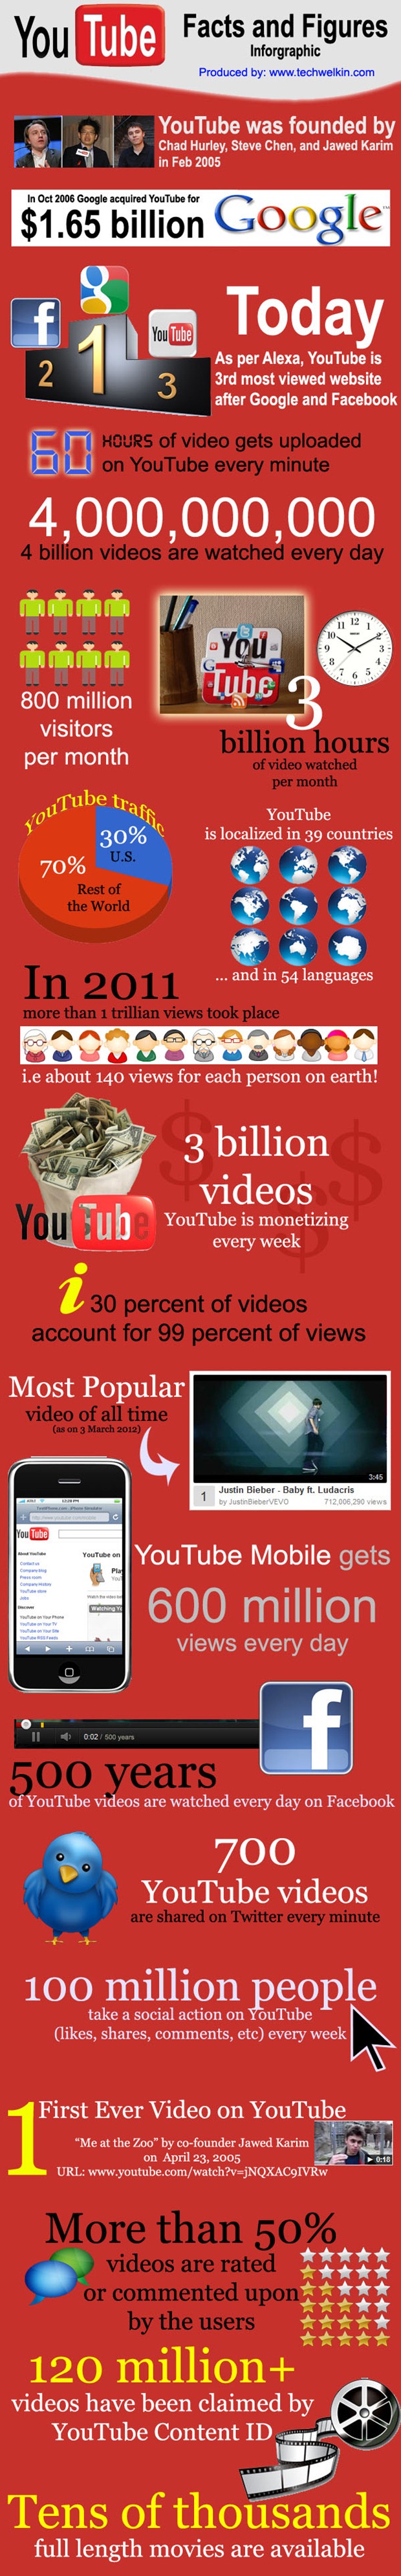 youtube-facts-figures